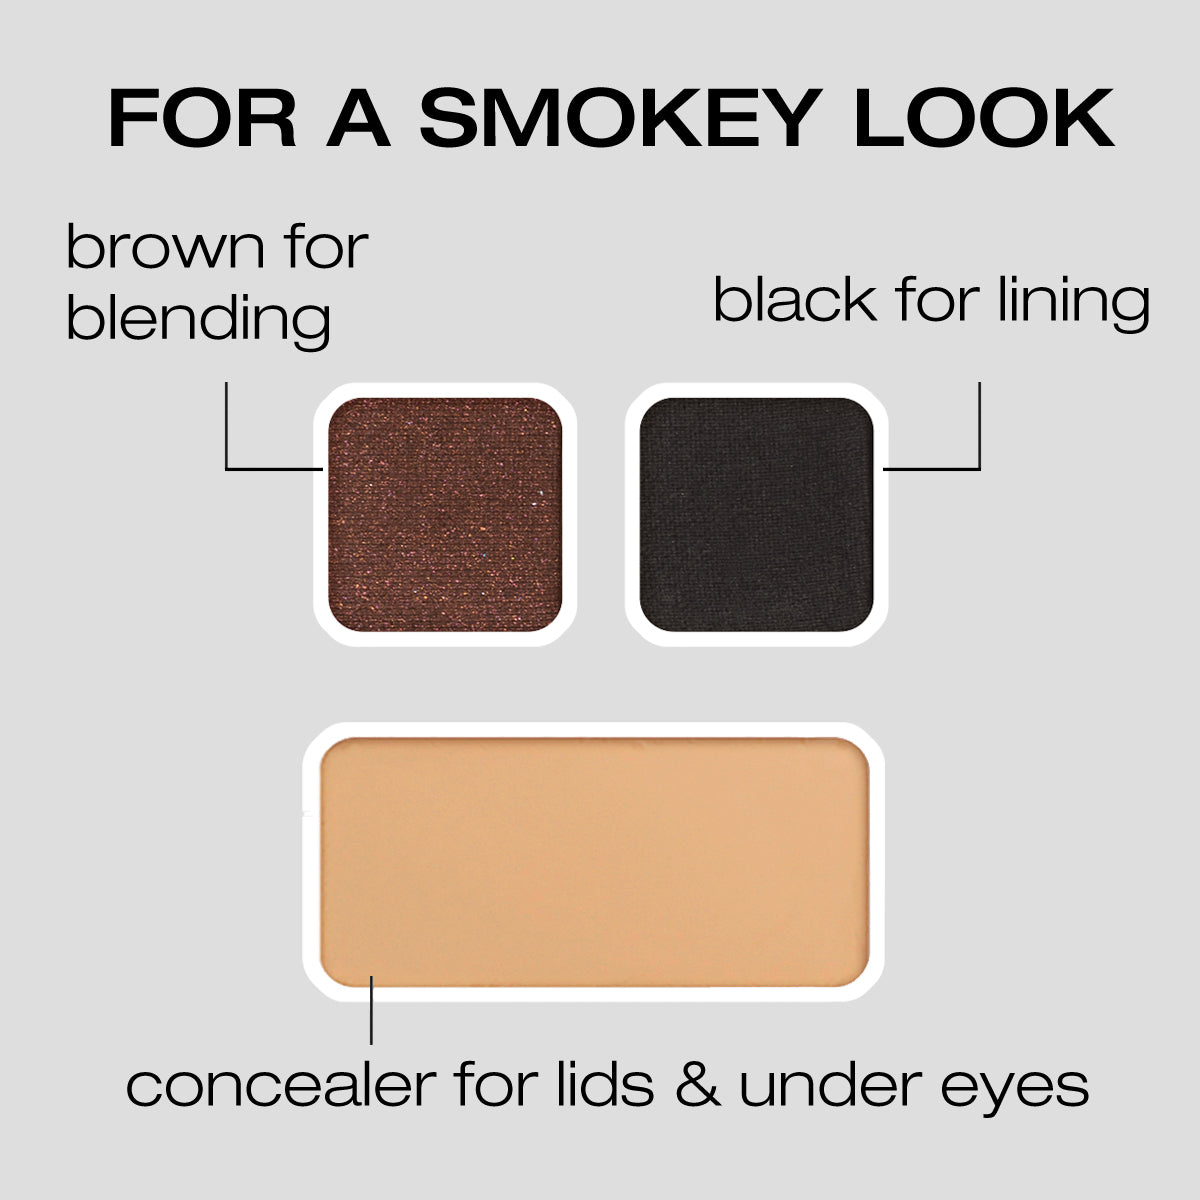 Infographic: For a smokey look, brown for blending, black for lining, concealer for lids & under eyes